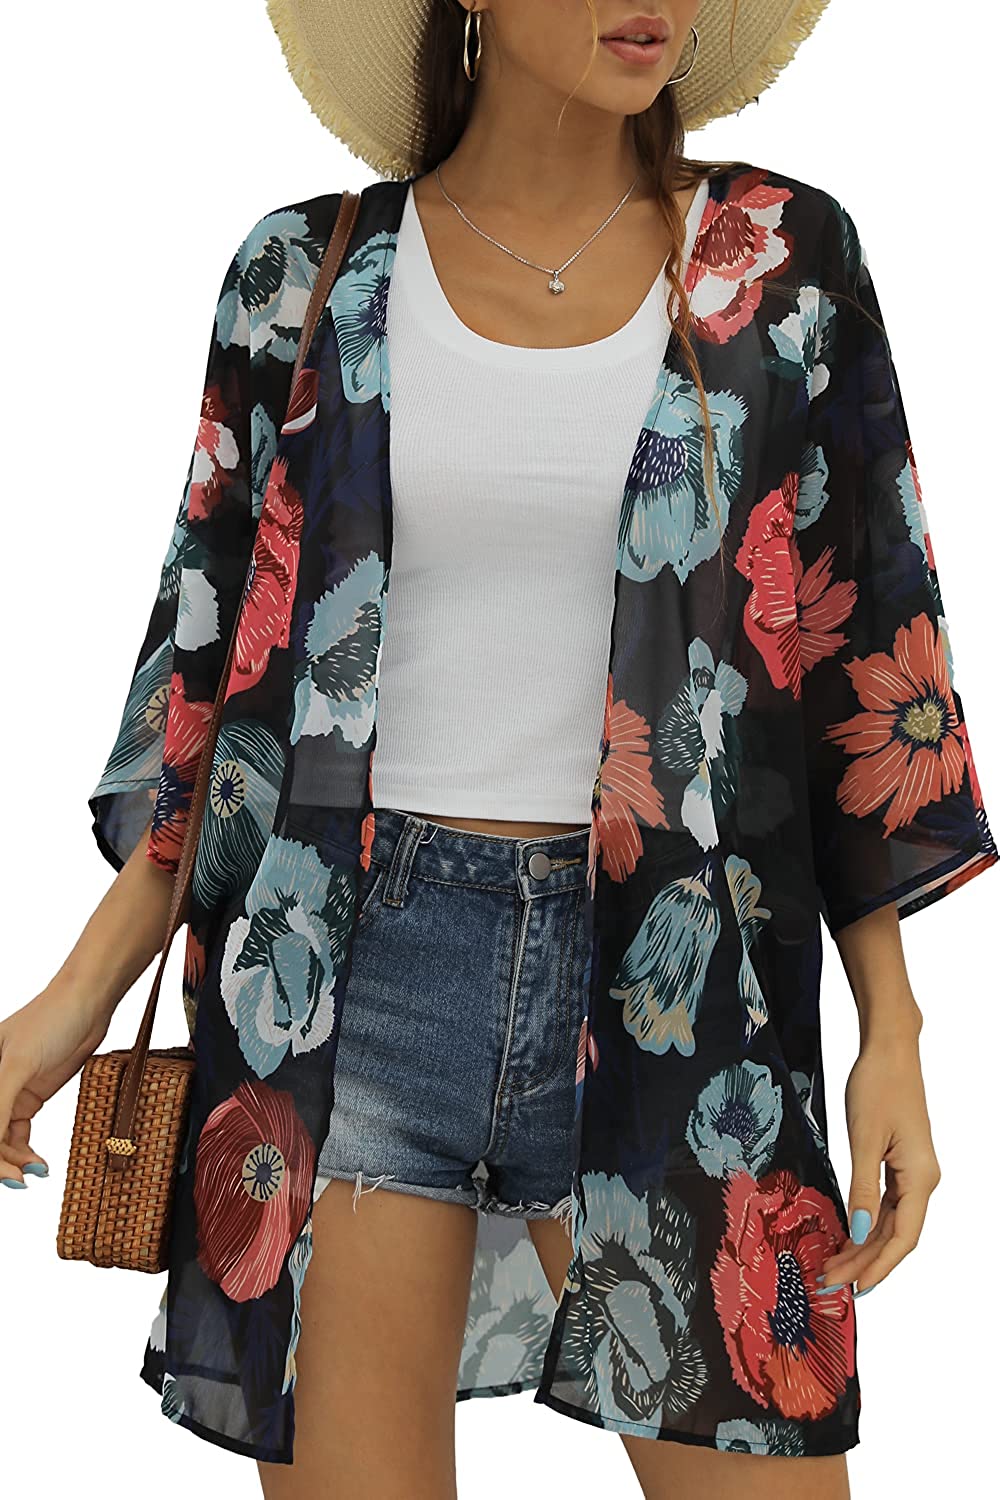 Women's Floral Print Puff Sleeve Kimono Cardigan Loose Cover Up Casual  Blouse To | eBay